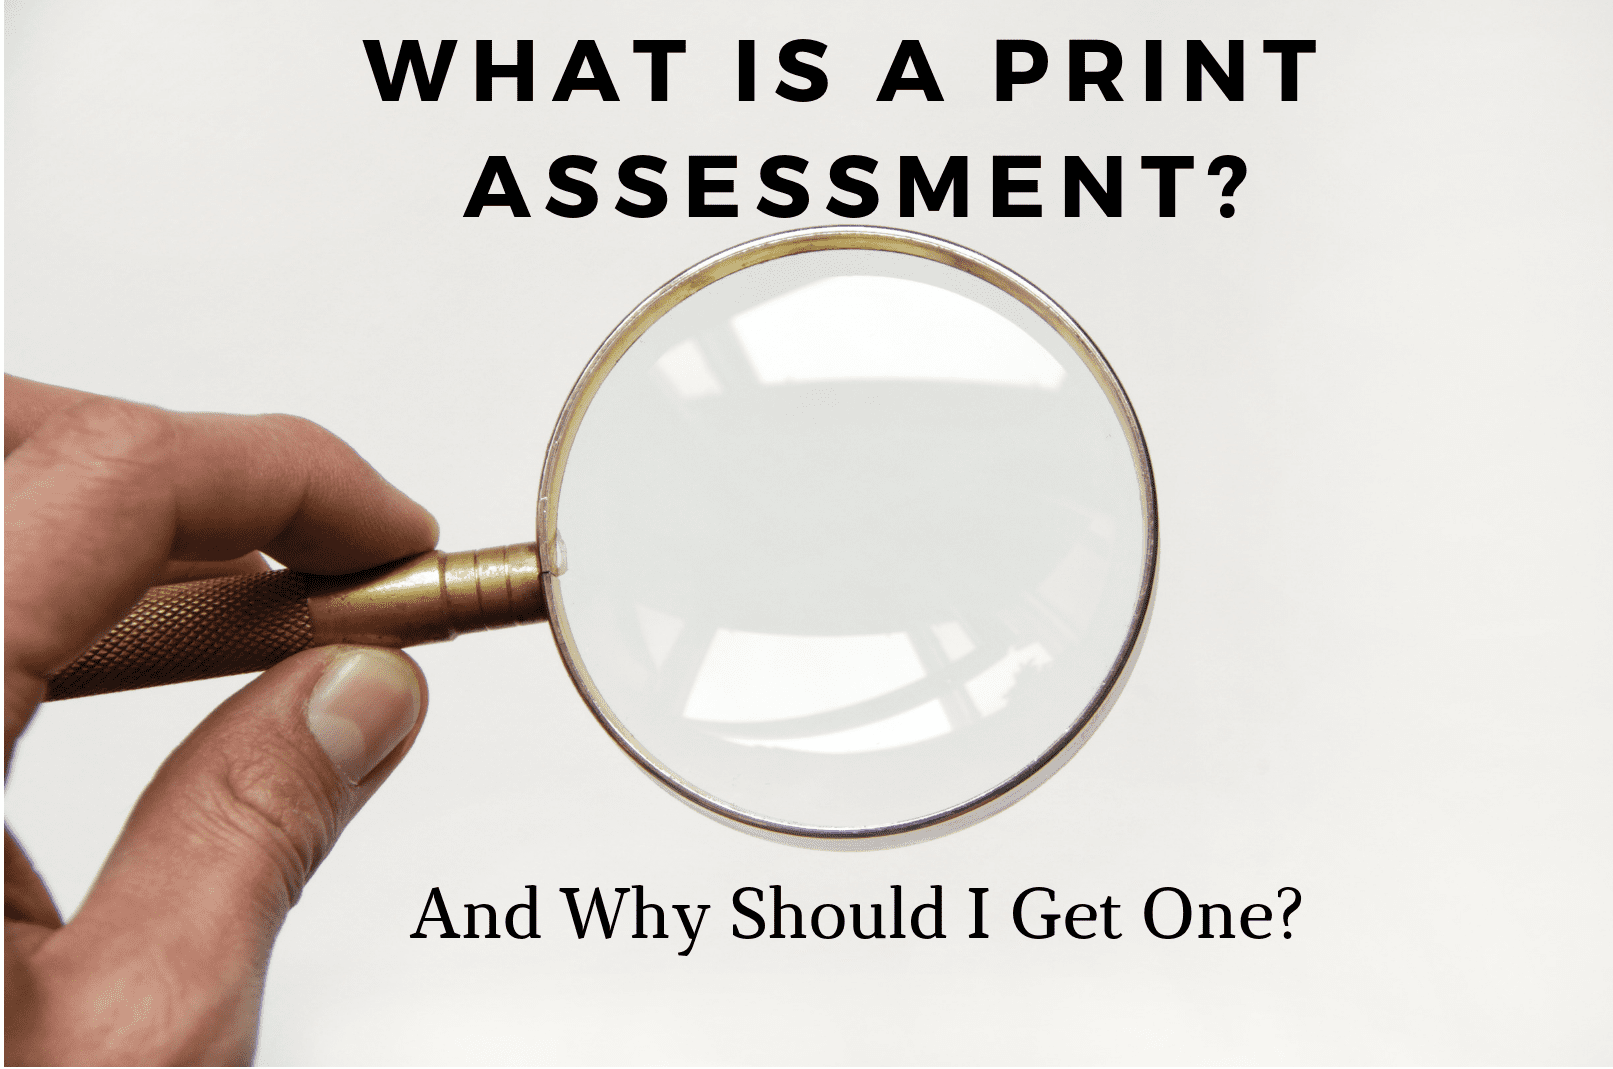 What is a print assessment and why should you get one?